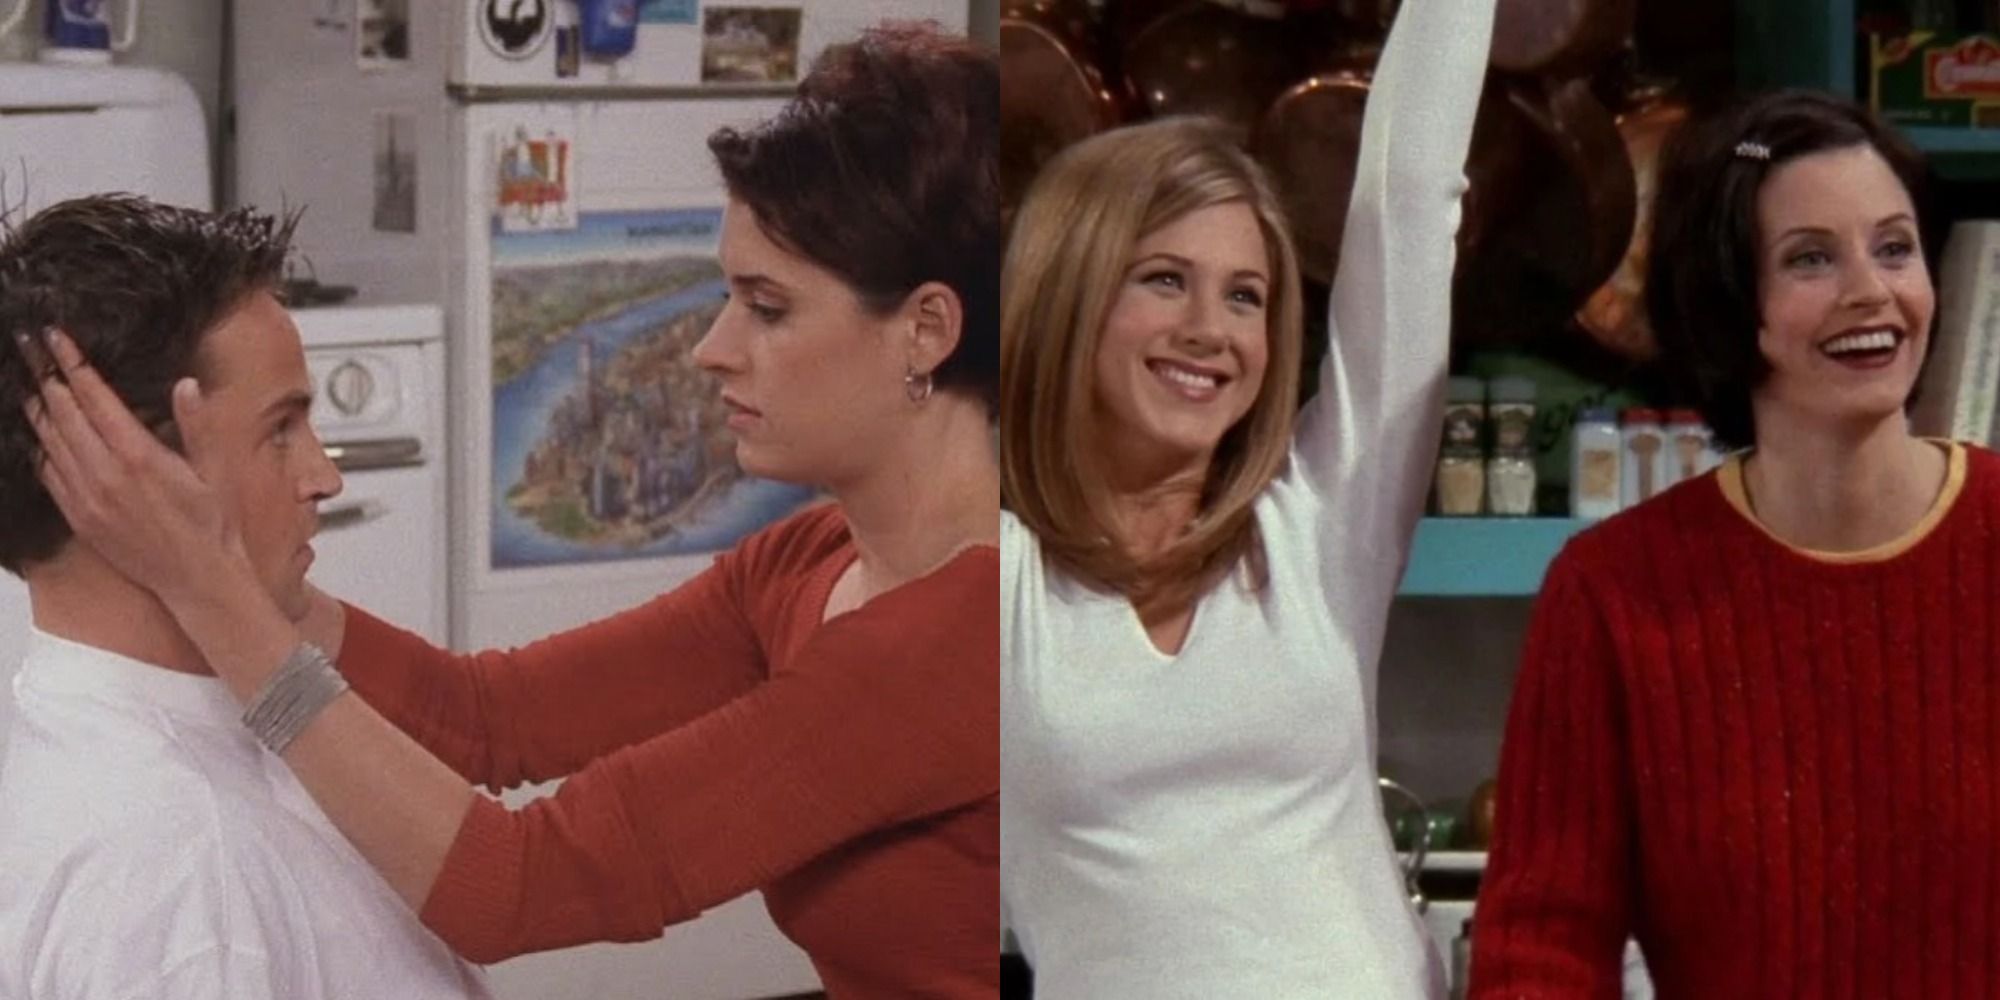 Chandler and Kathy and Rachel and Monica in Friends.